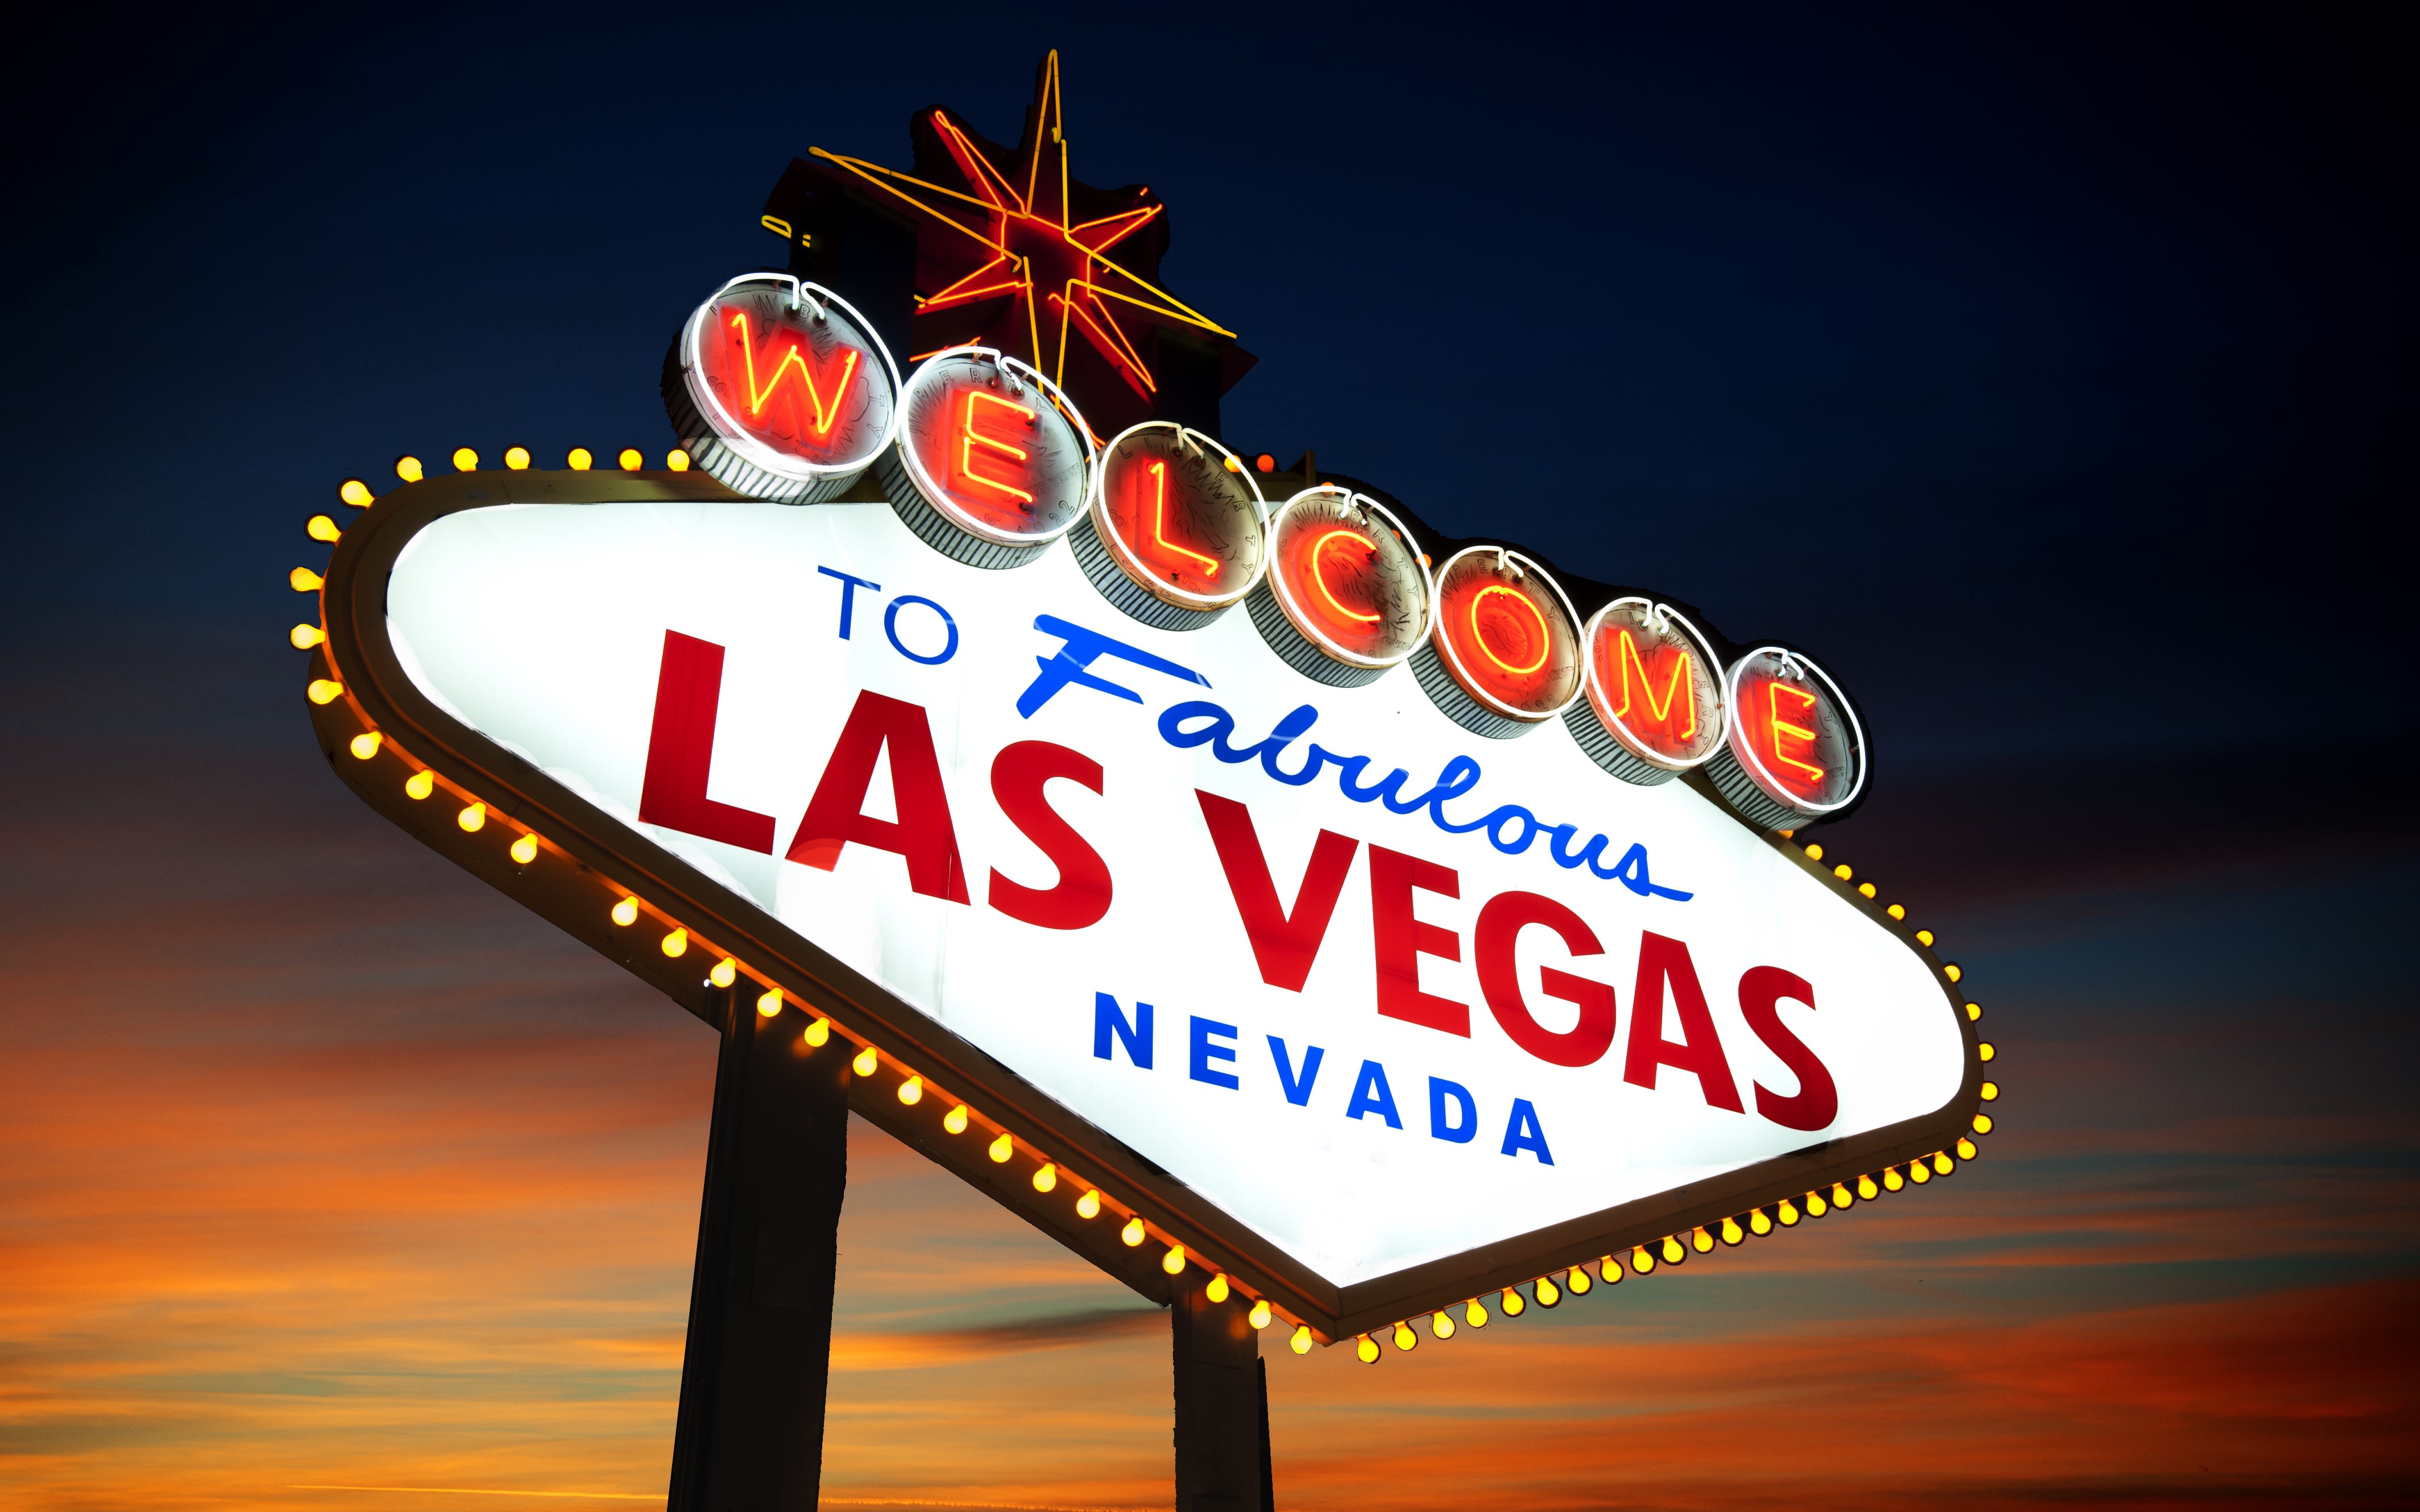 An image of the Welcome to the Fabulous Las Vegas sign in Las Vegas, Nevada